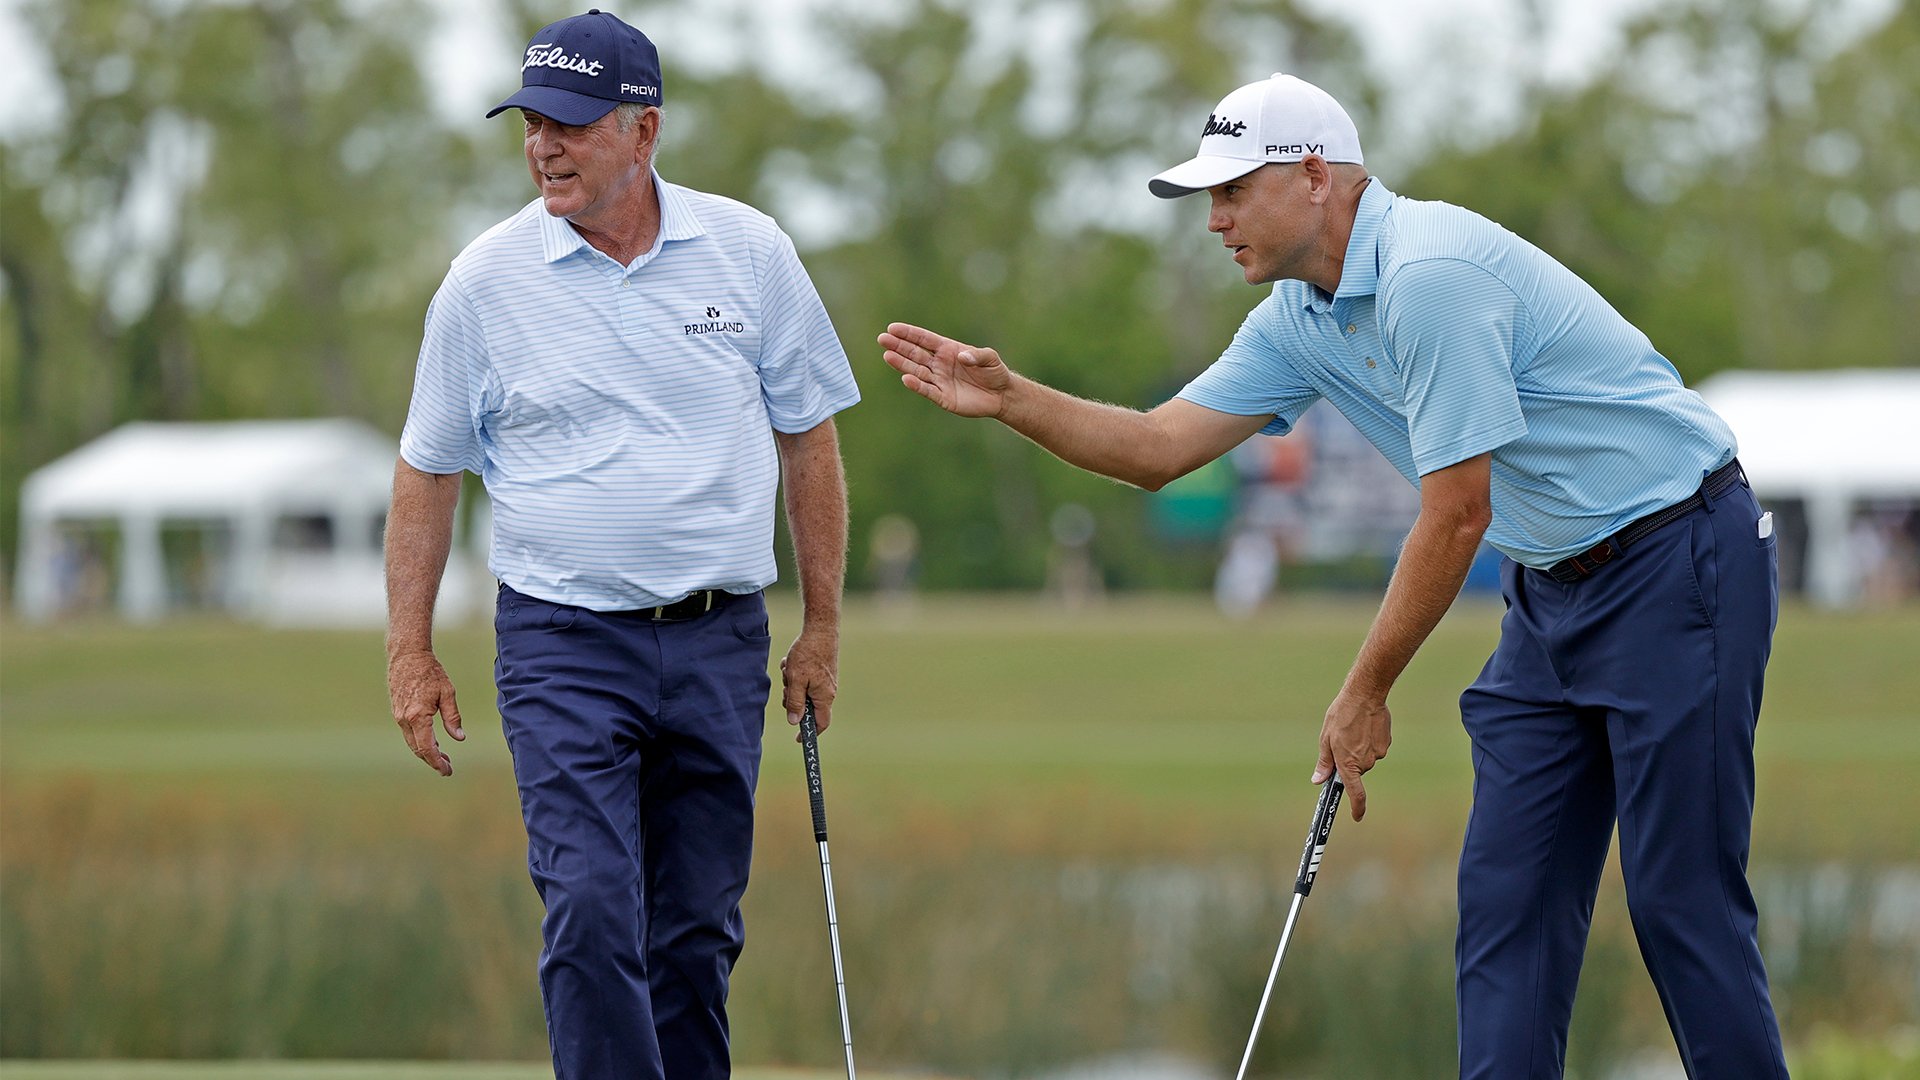 Jay Haas Breaks Over 40-Year-Old PGA Tour Record Held by Sam Snead